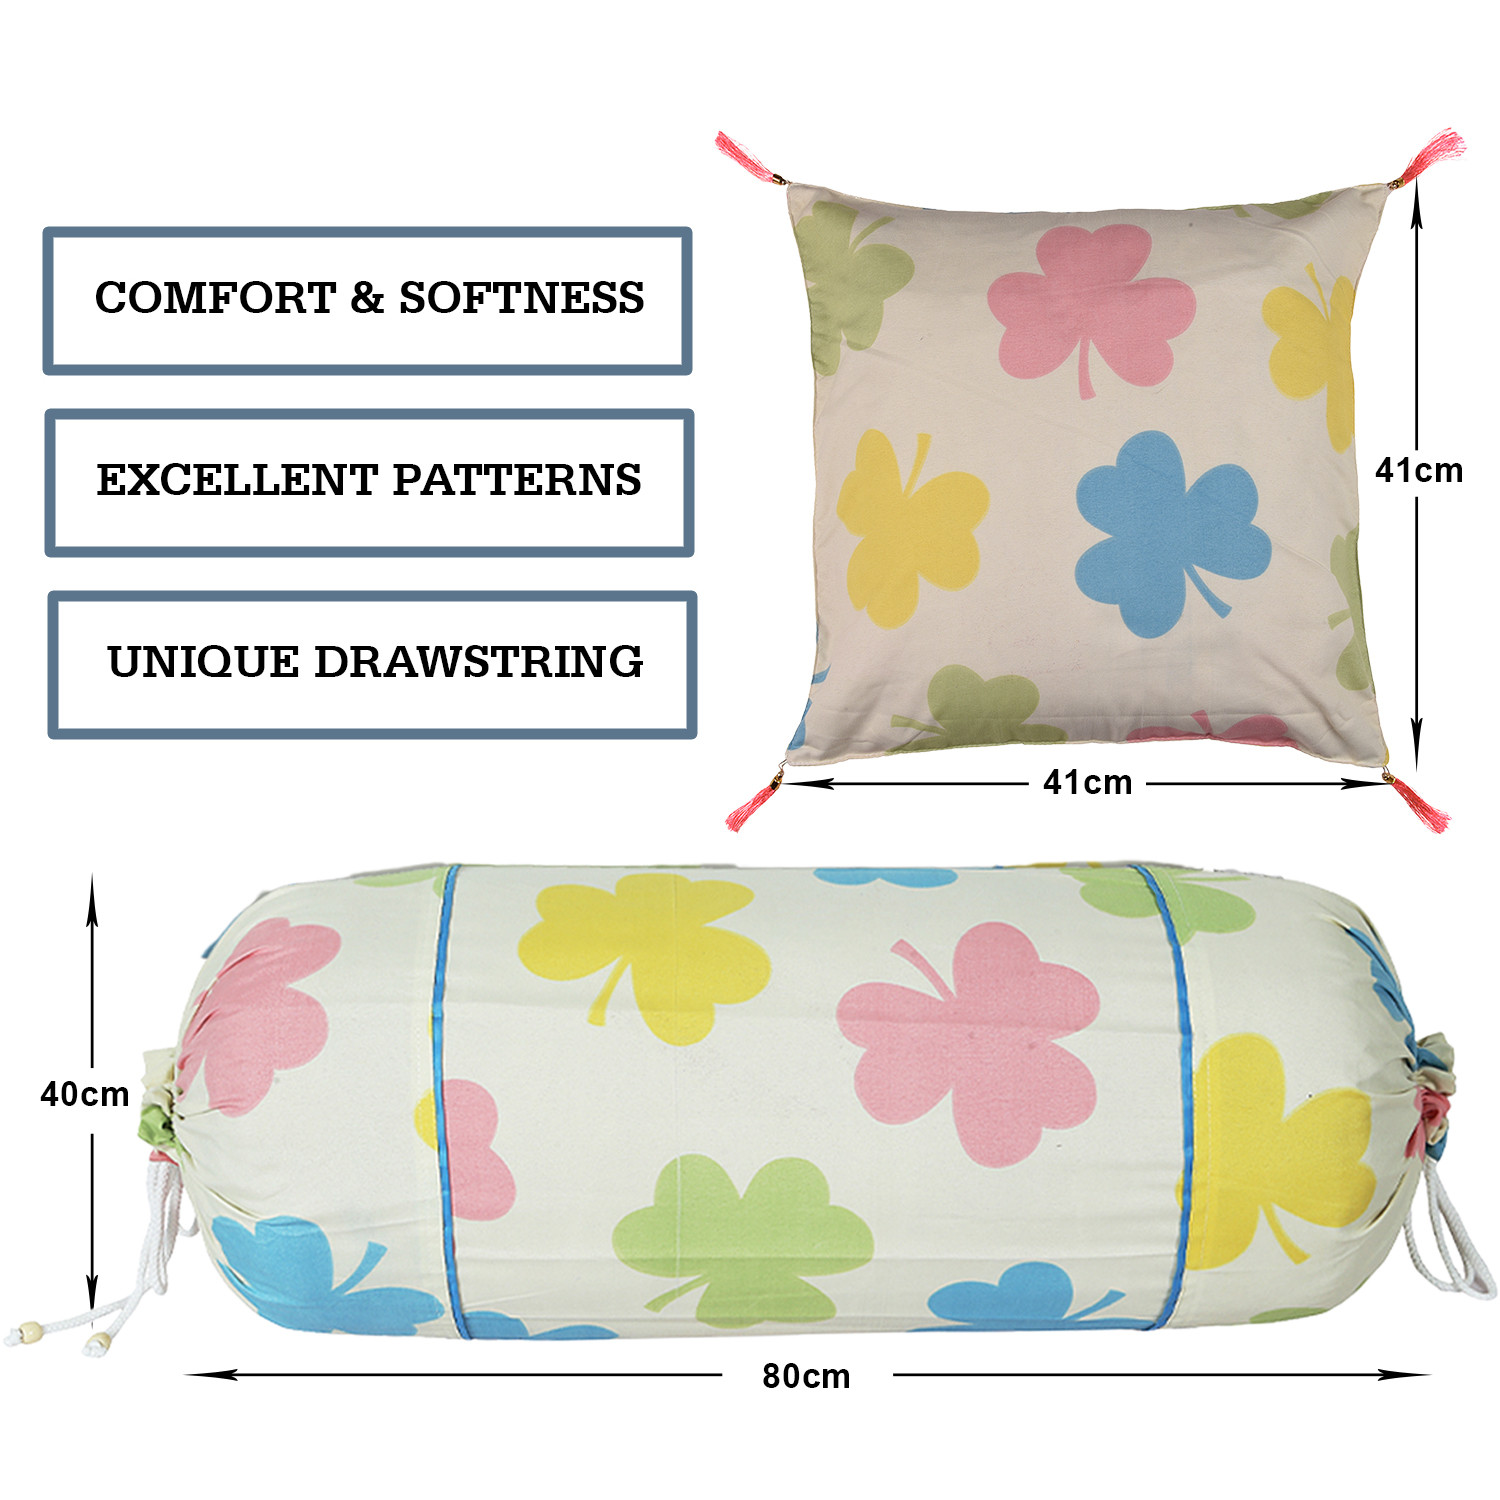 Kuber Industries Bolster Cover | Soft Cotton 2 Piece Bolster Cover Set  | 3 Piece Square Cushion Cover Set | Multi-Flower Design Bolster & Cushion Cover Set | Pack of 5  | Cream